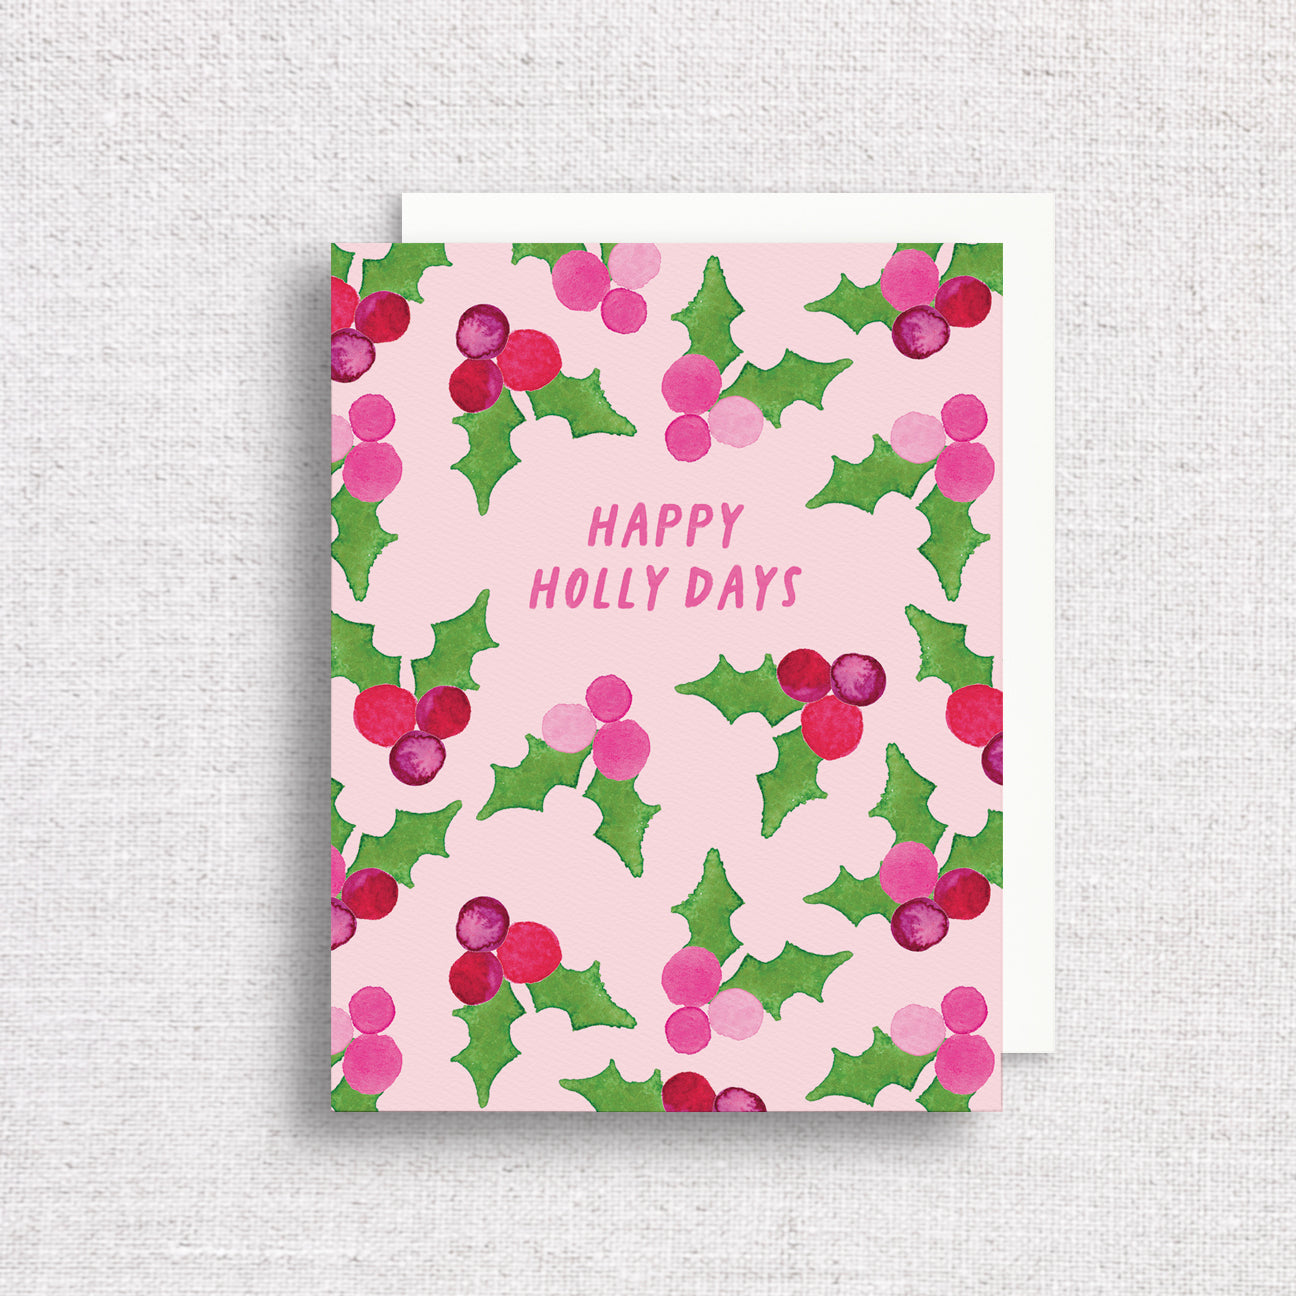 Happy Holly Days Pink Christmas Greeting Card by Gert & Co